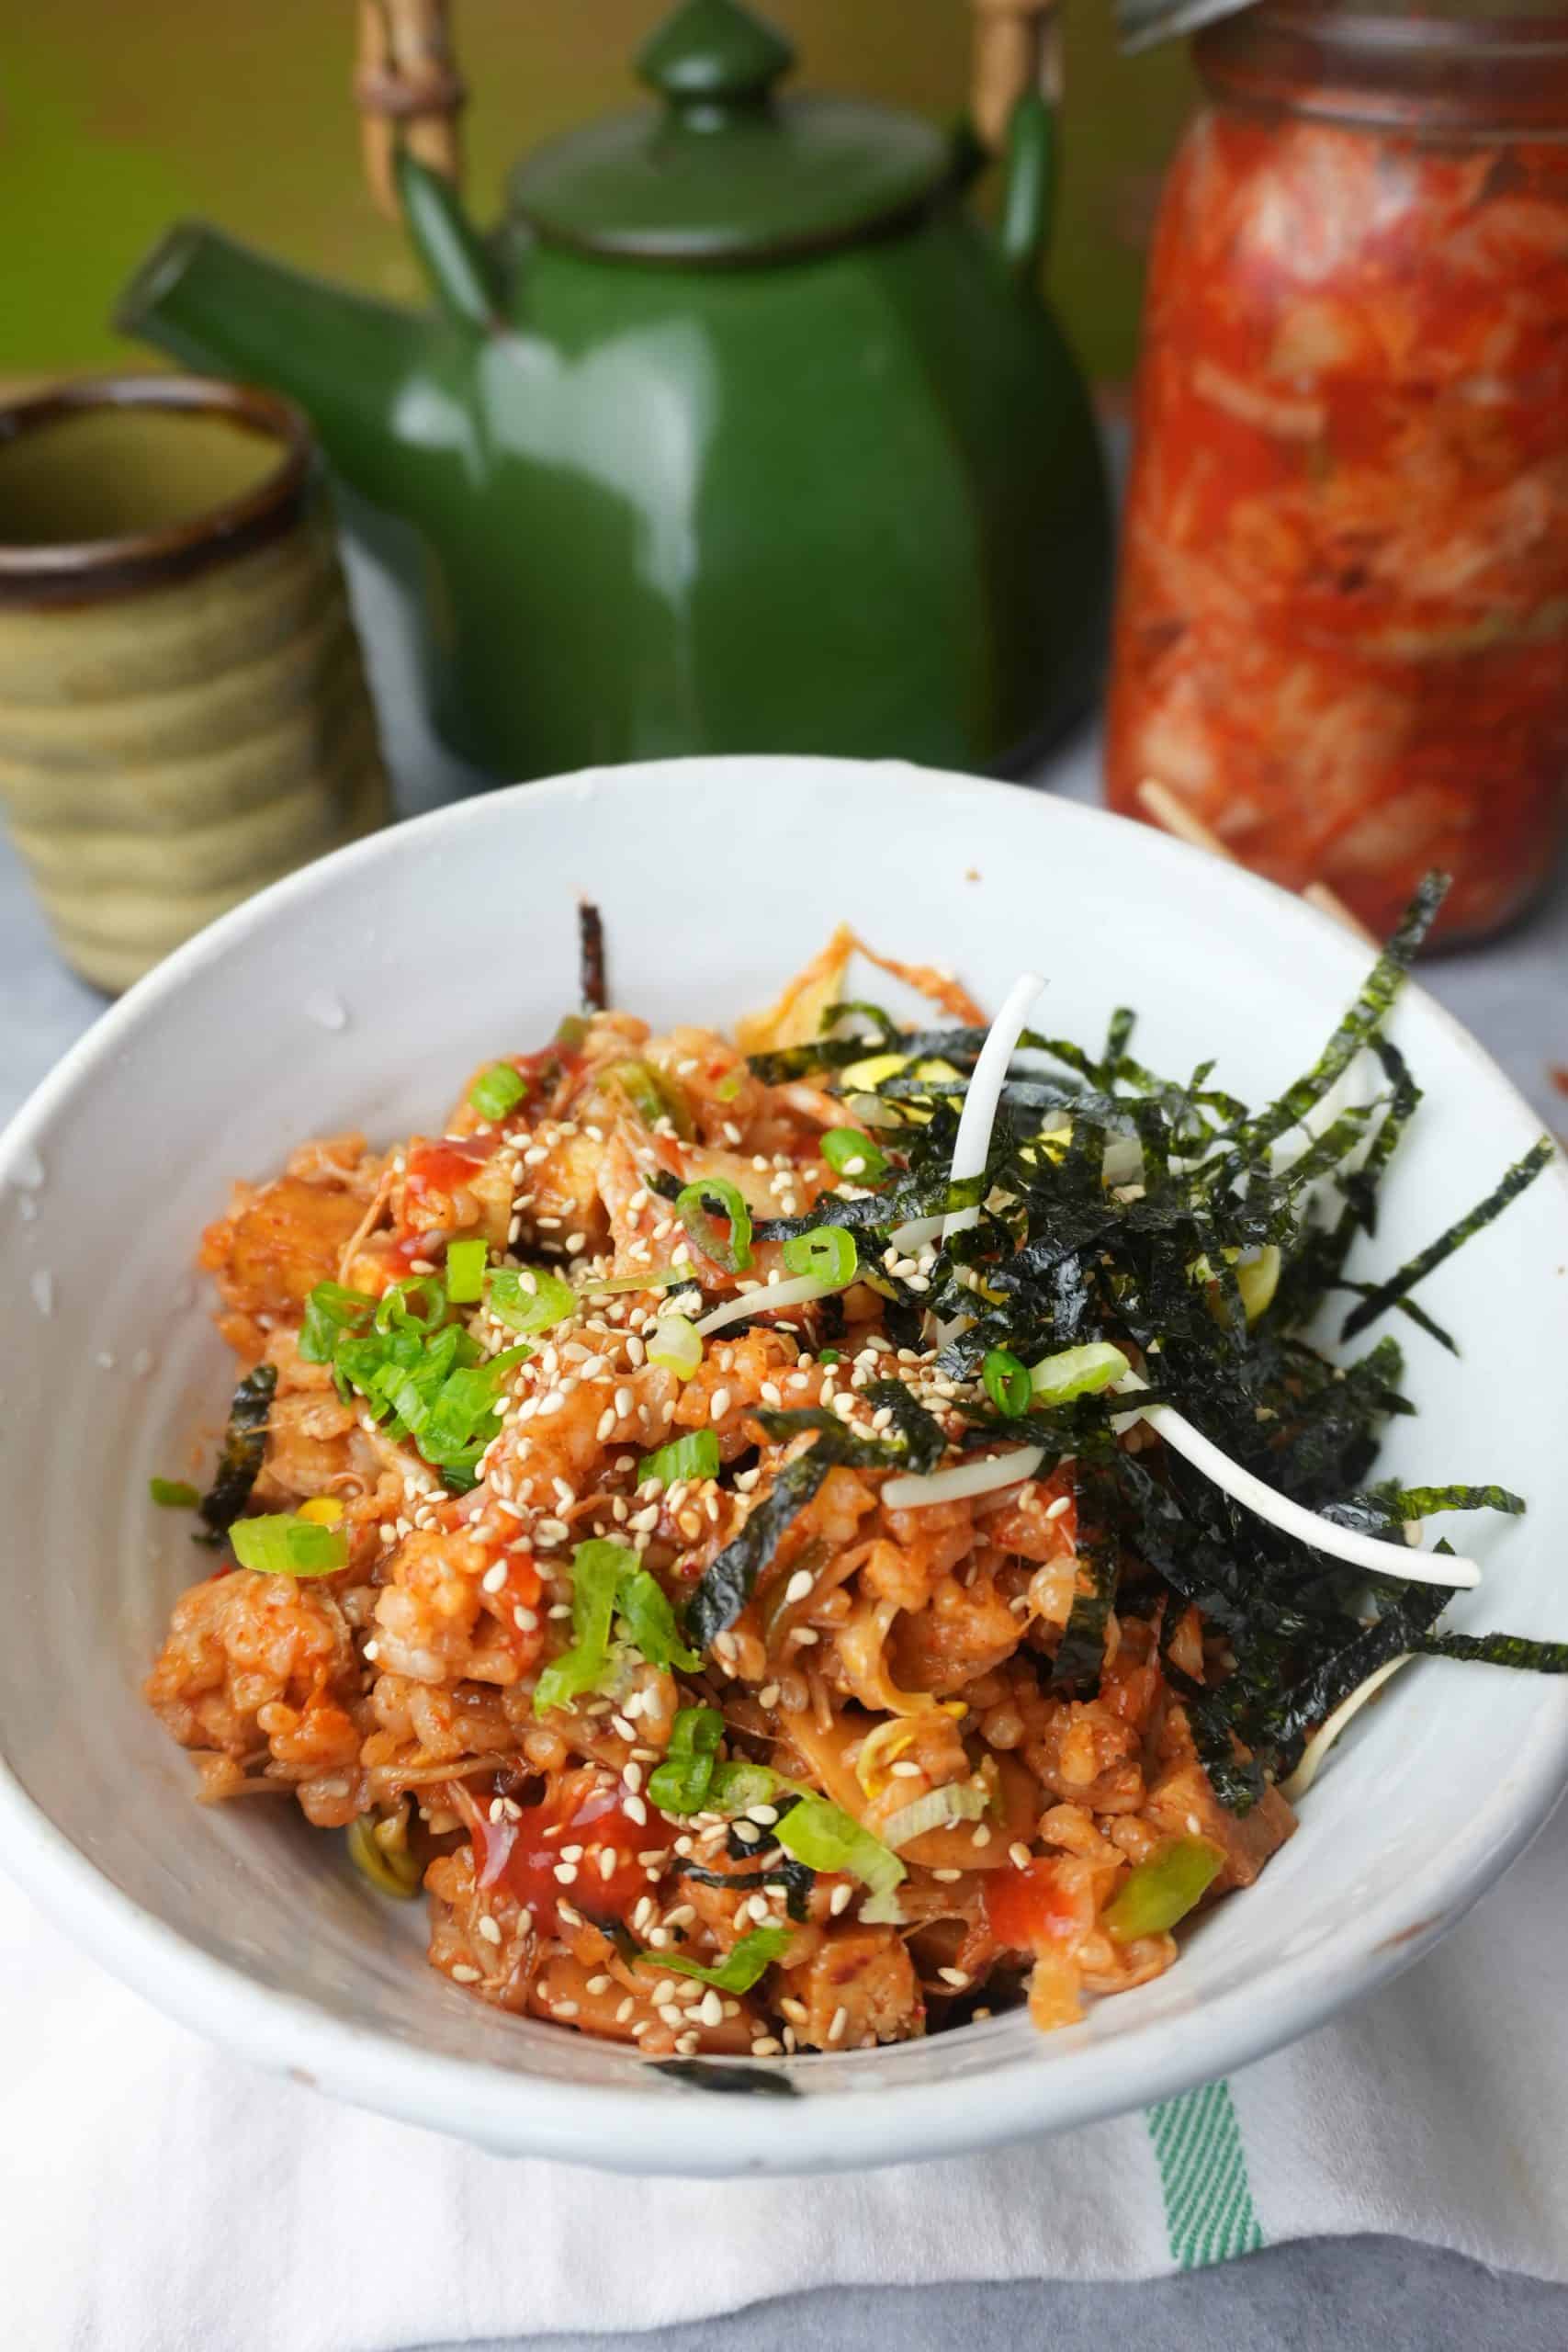 vegan kimchi fried rice in a white bowl. Napkin underneath the bowl. Teacup and pitcher and a jar of kimchi in the background